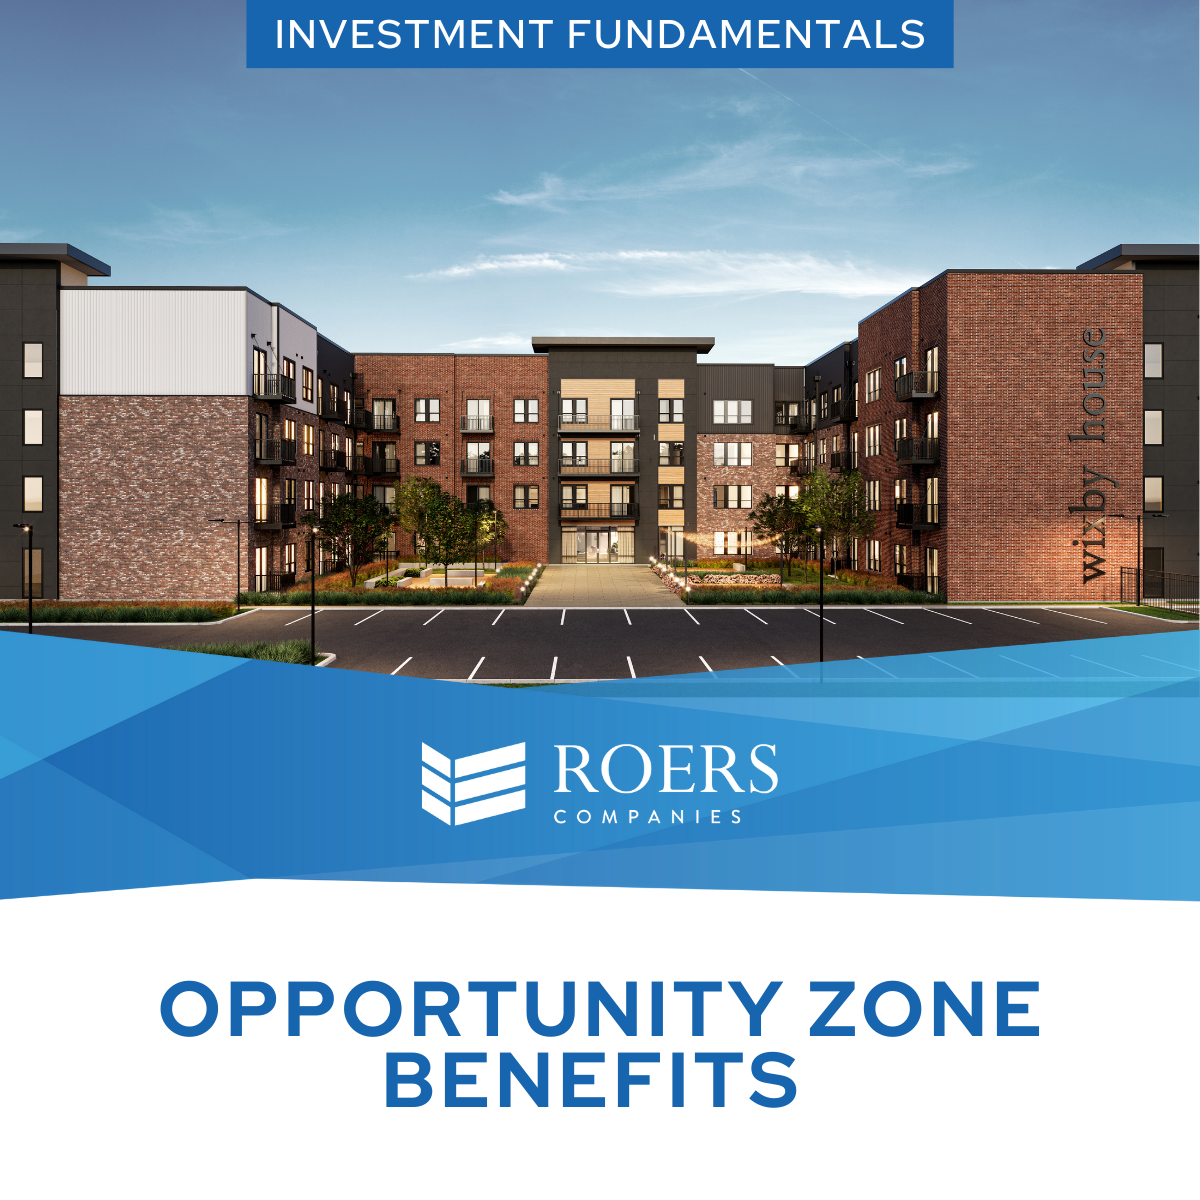 Opportunity zone benefits - Wixby House